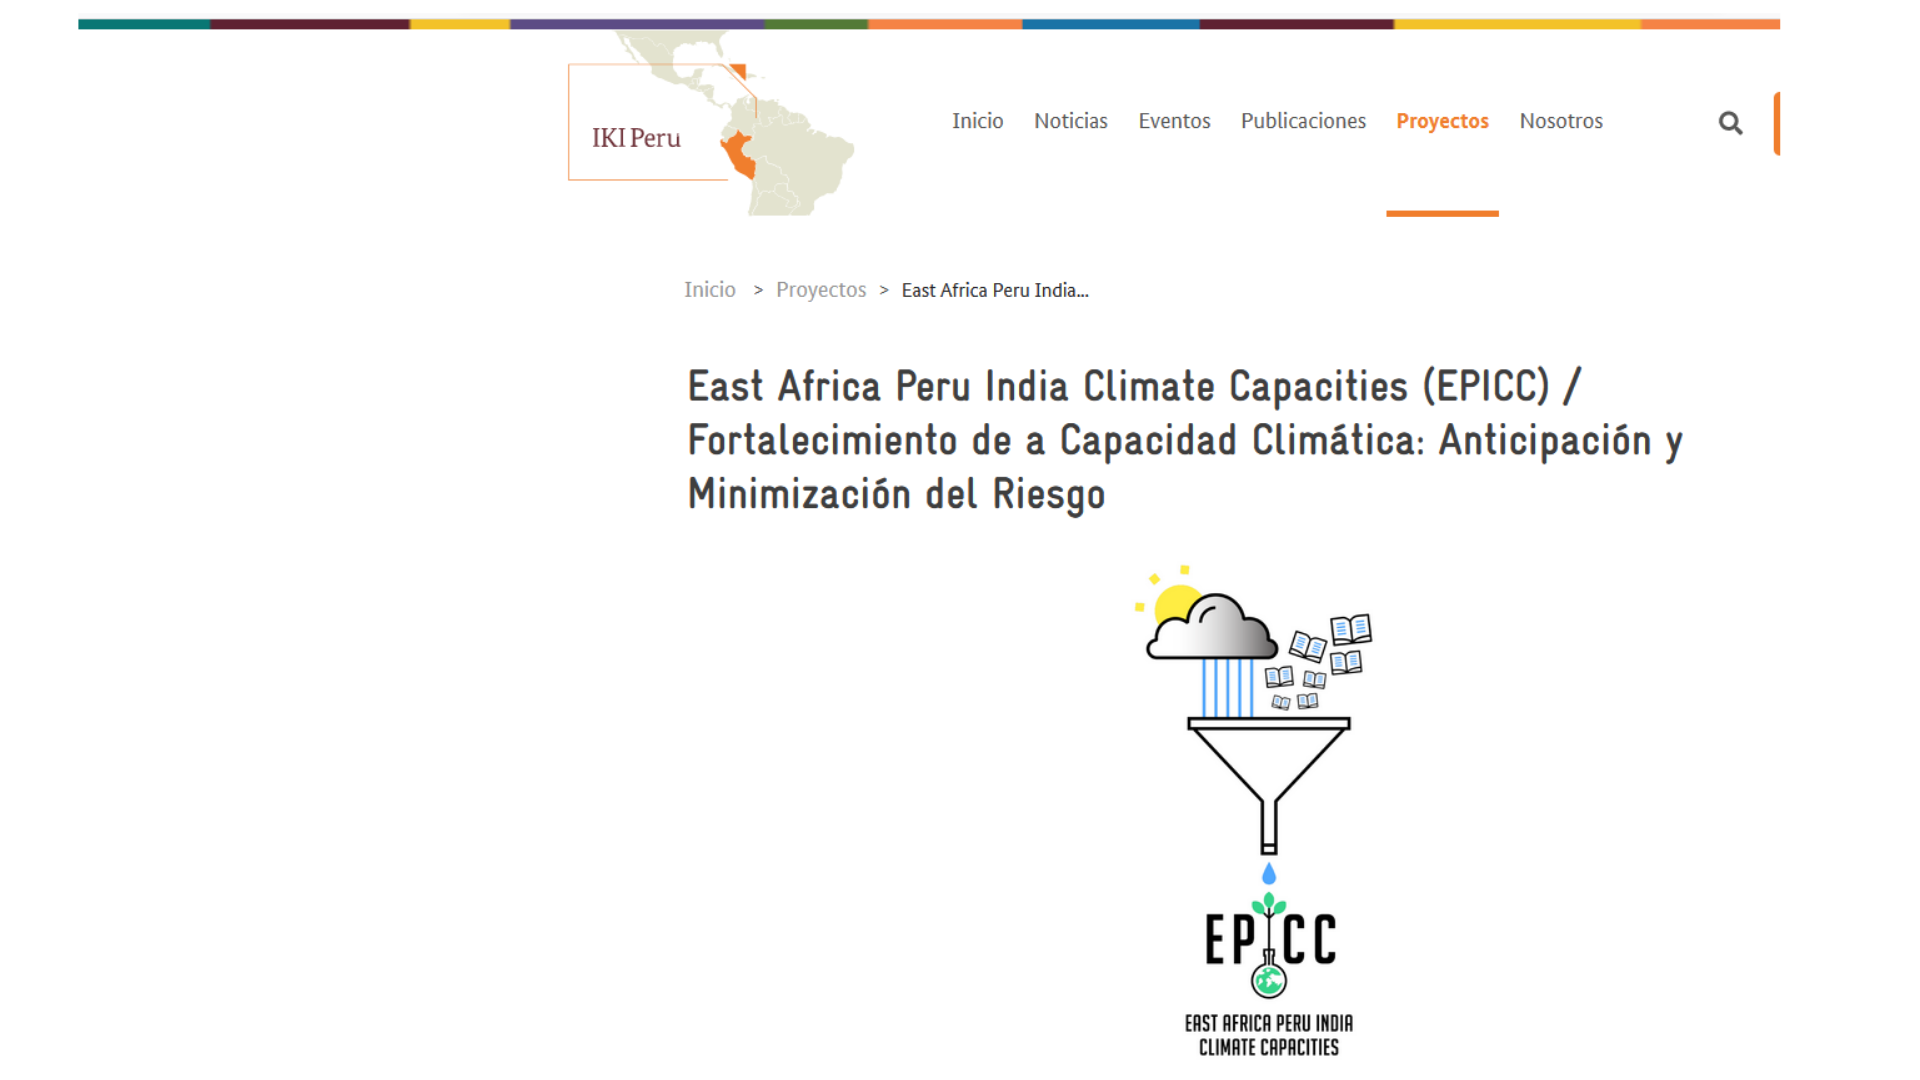 EPICC is part of the digital IKI Peru Networking Platform that is available in Spanish